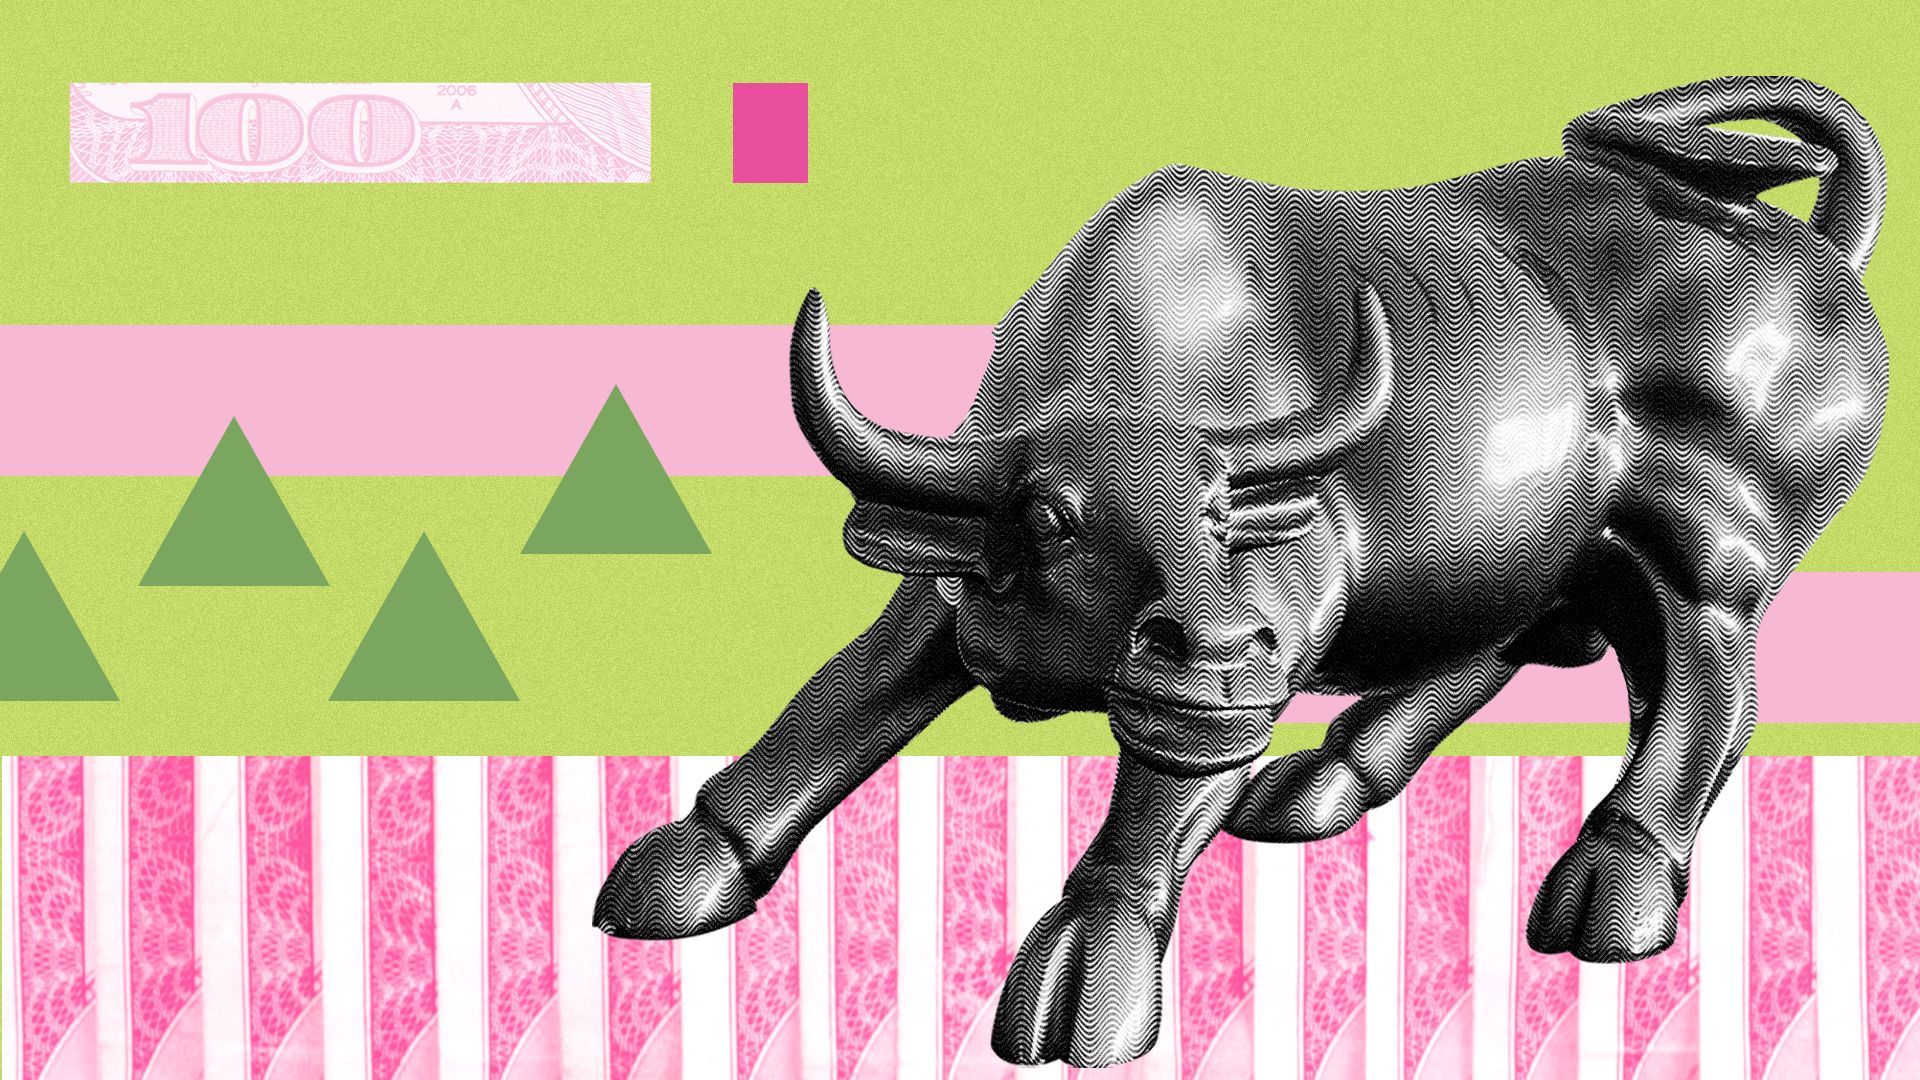 Illustration of the Wall St. bull statue, abstract shapes and money elements.